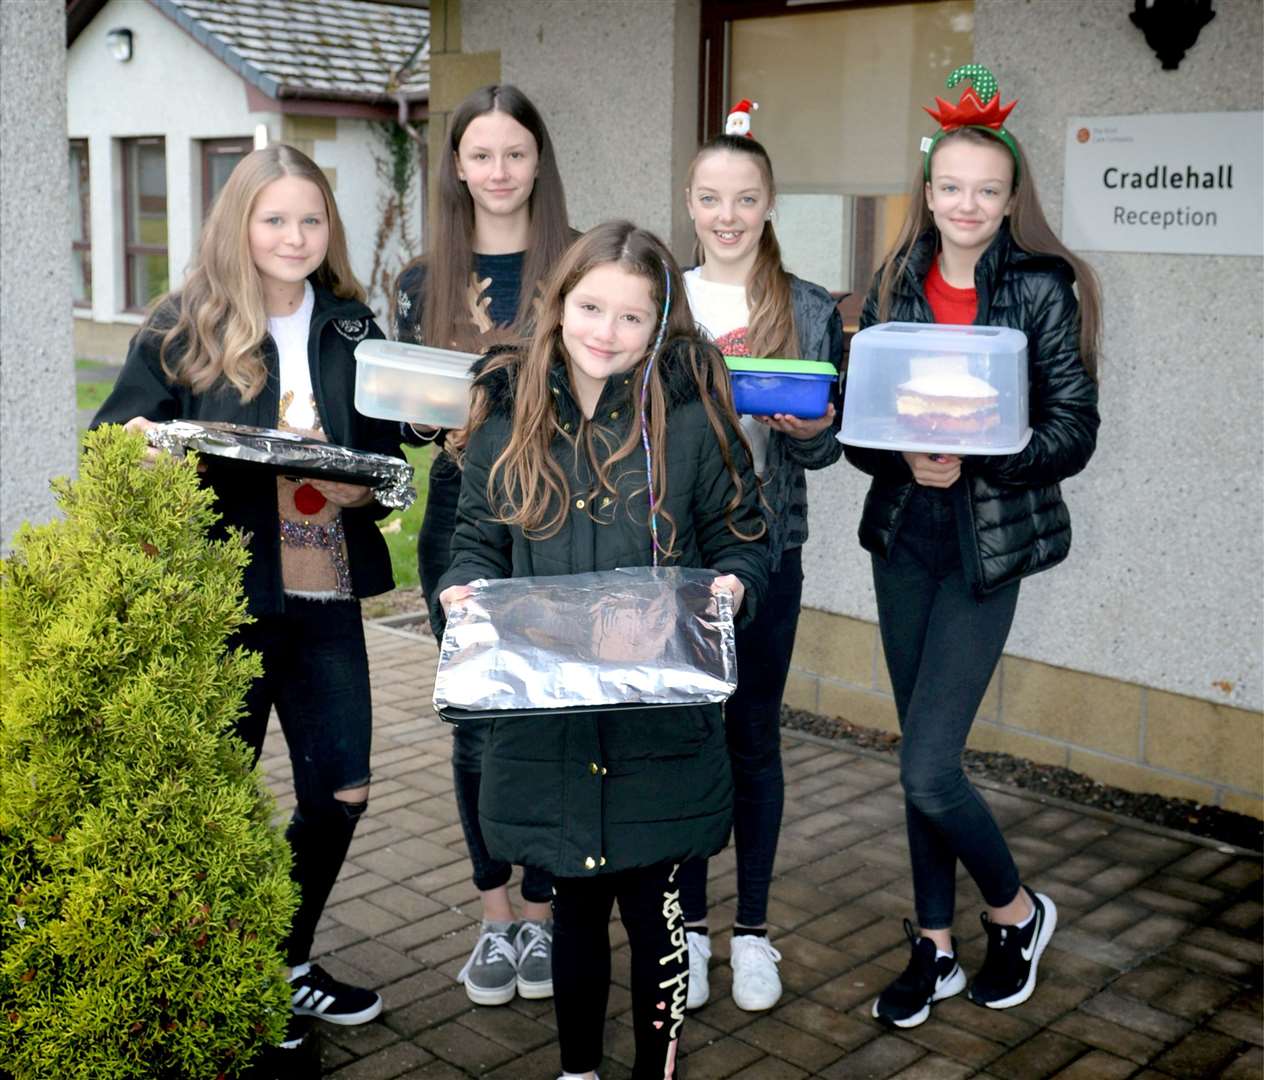 Fiona Roehling (13), Iona Rennie (12), Alicia Glendinning (9), Ruby Mackintosh (13) and Paige Glendinning (13) from Culloden bring 50 cakes to Cradlehall Care Home as a treat for the residents.